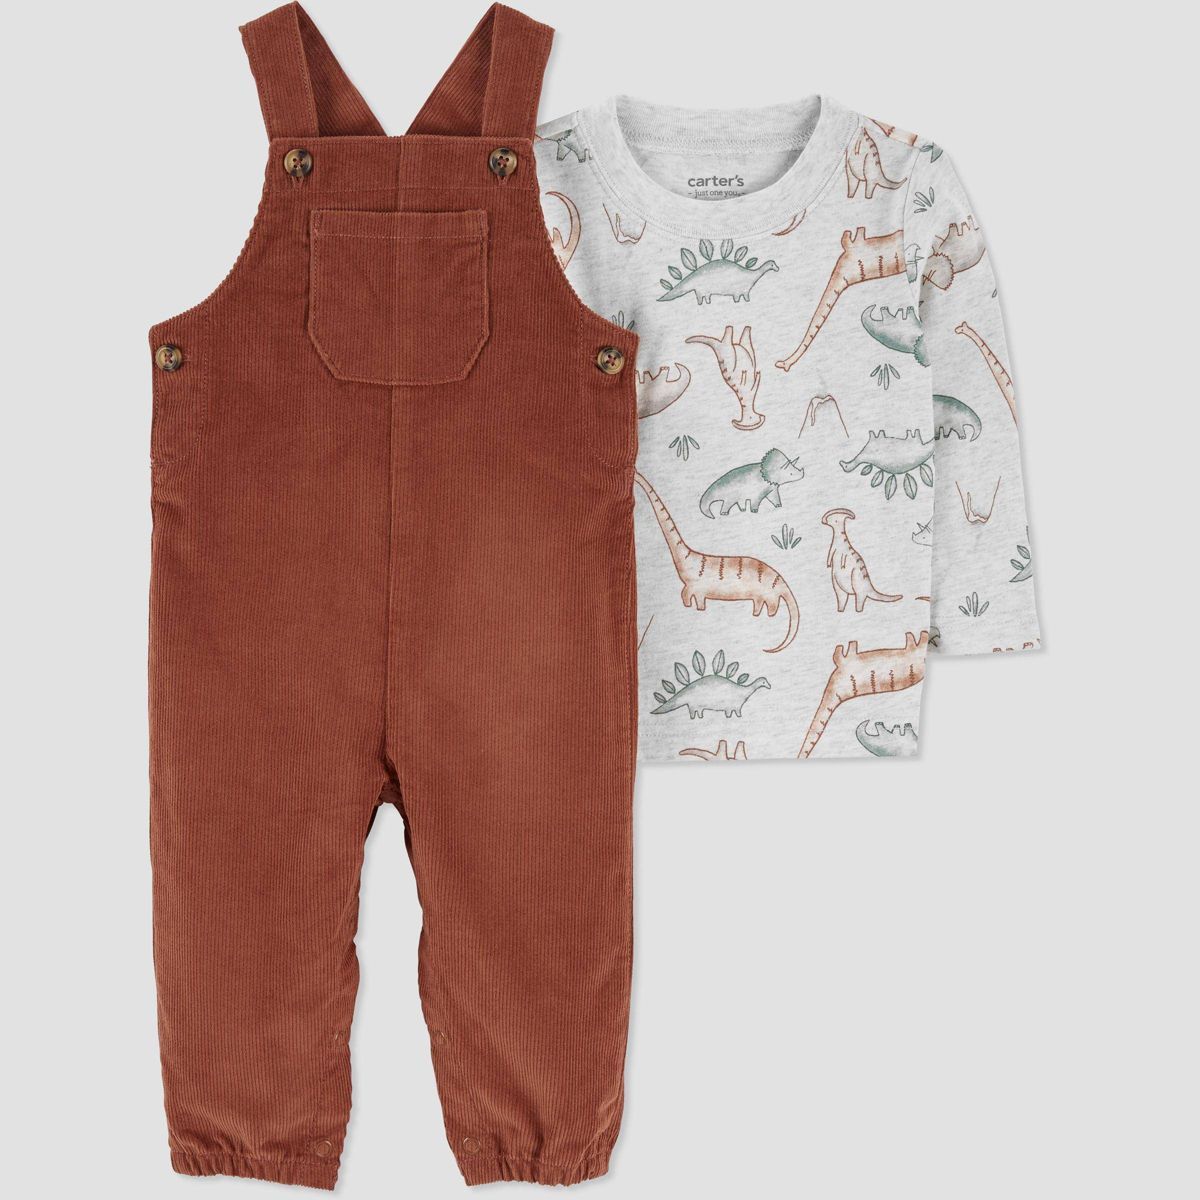 Carter's Just One You®️ Baby Boys' Dino Top & Overalls Set - Brown | Target